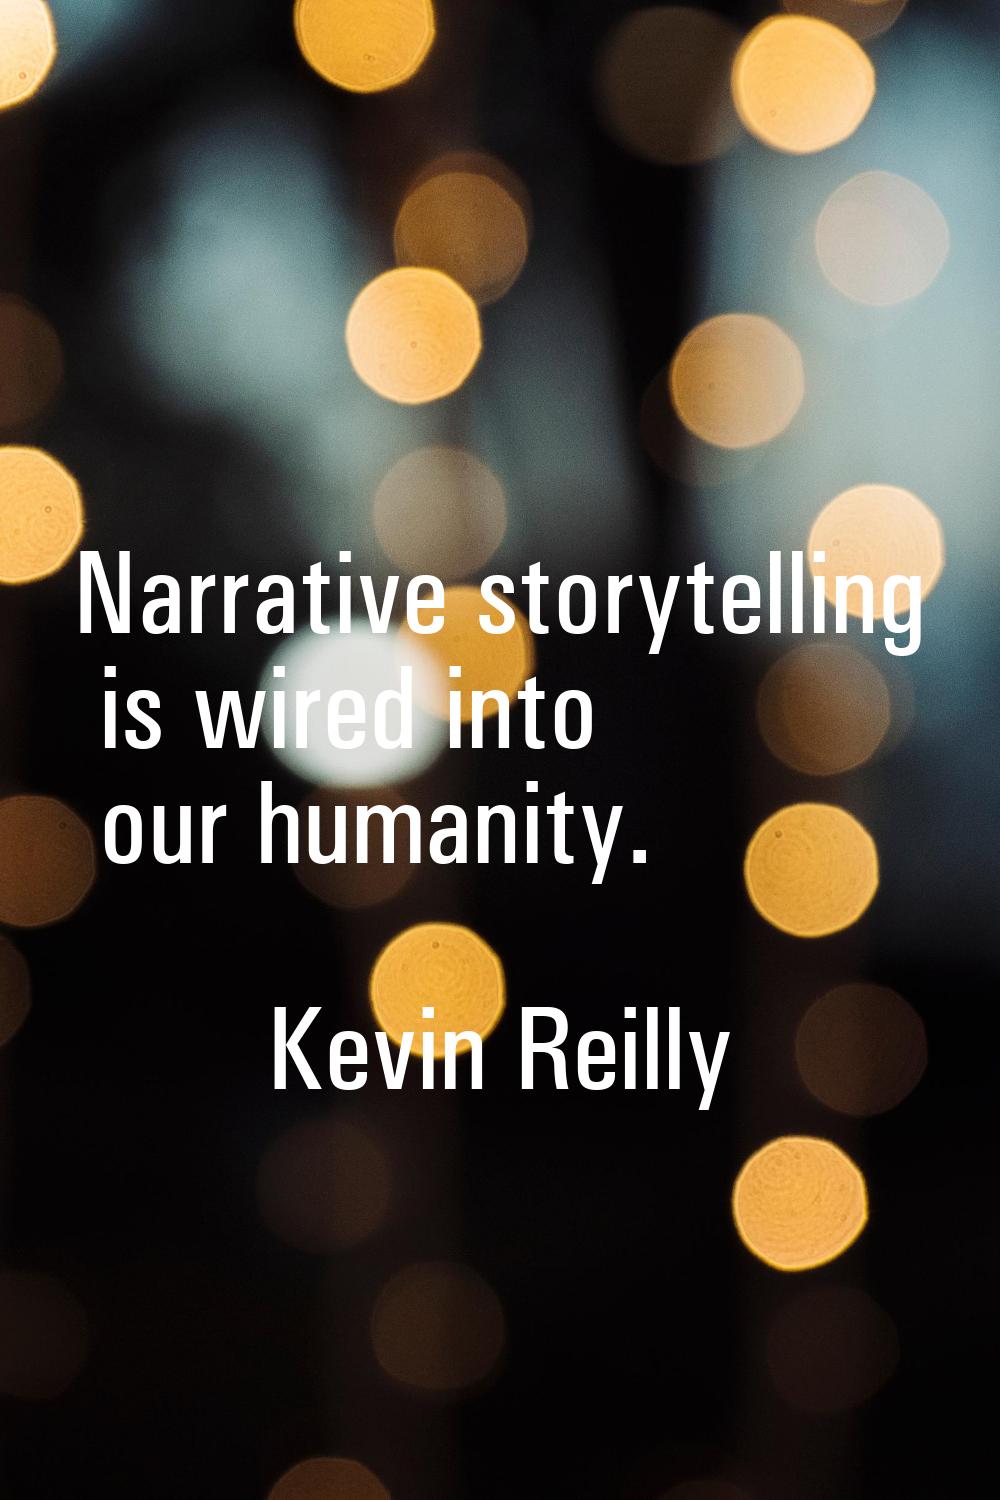 Narrative storytelling is wired into our humanity.